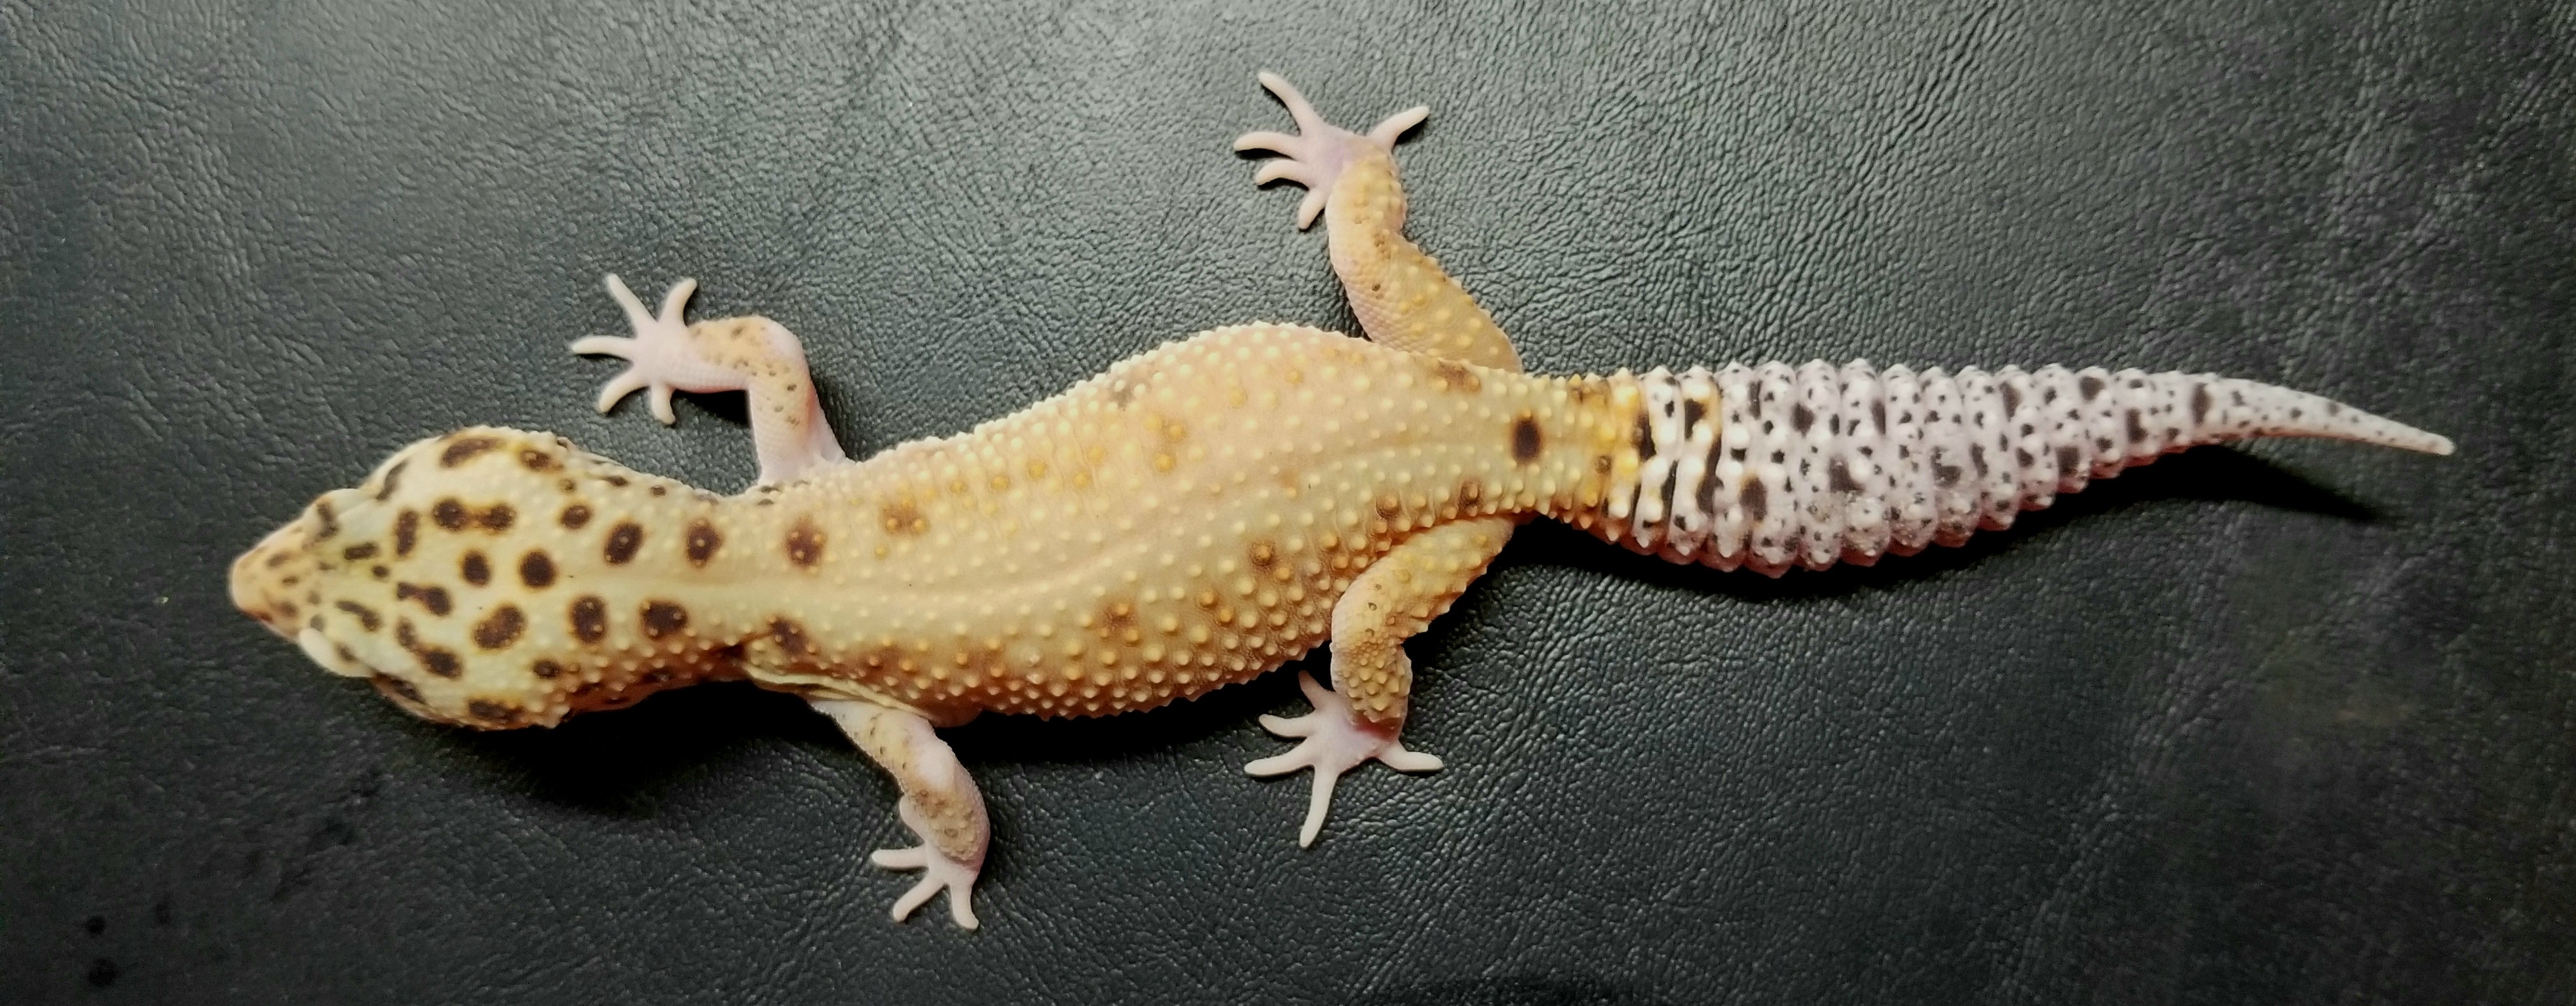 Eclipse Leopard Gecko by Newman Brothers Reptiles